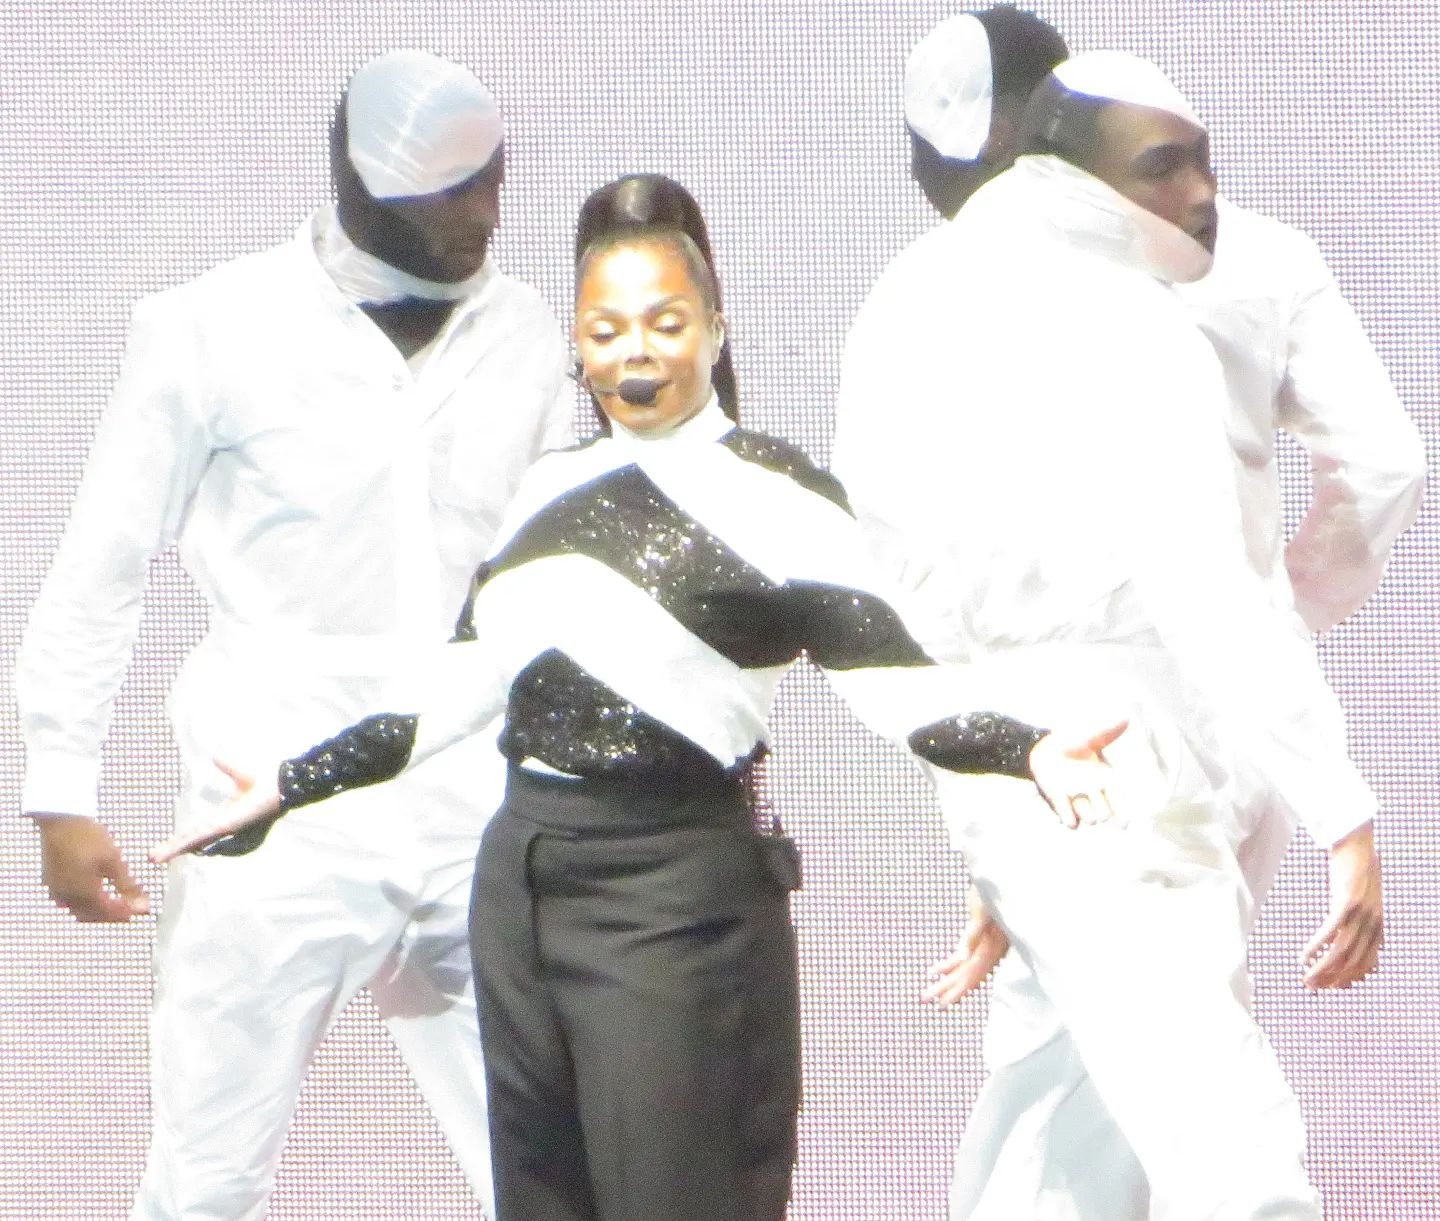 Janet Jackson
Absolutely stunning ❤️🔥❤️

#nofilter #concertphotography #lawnpass #dance #oneshot #legend #janetjackson #queen #epic